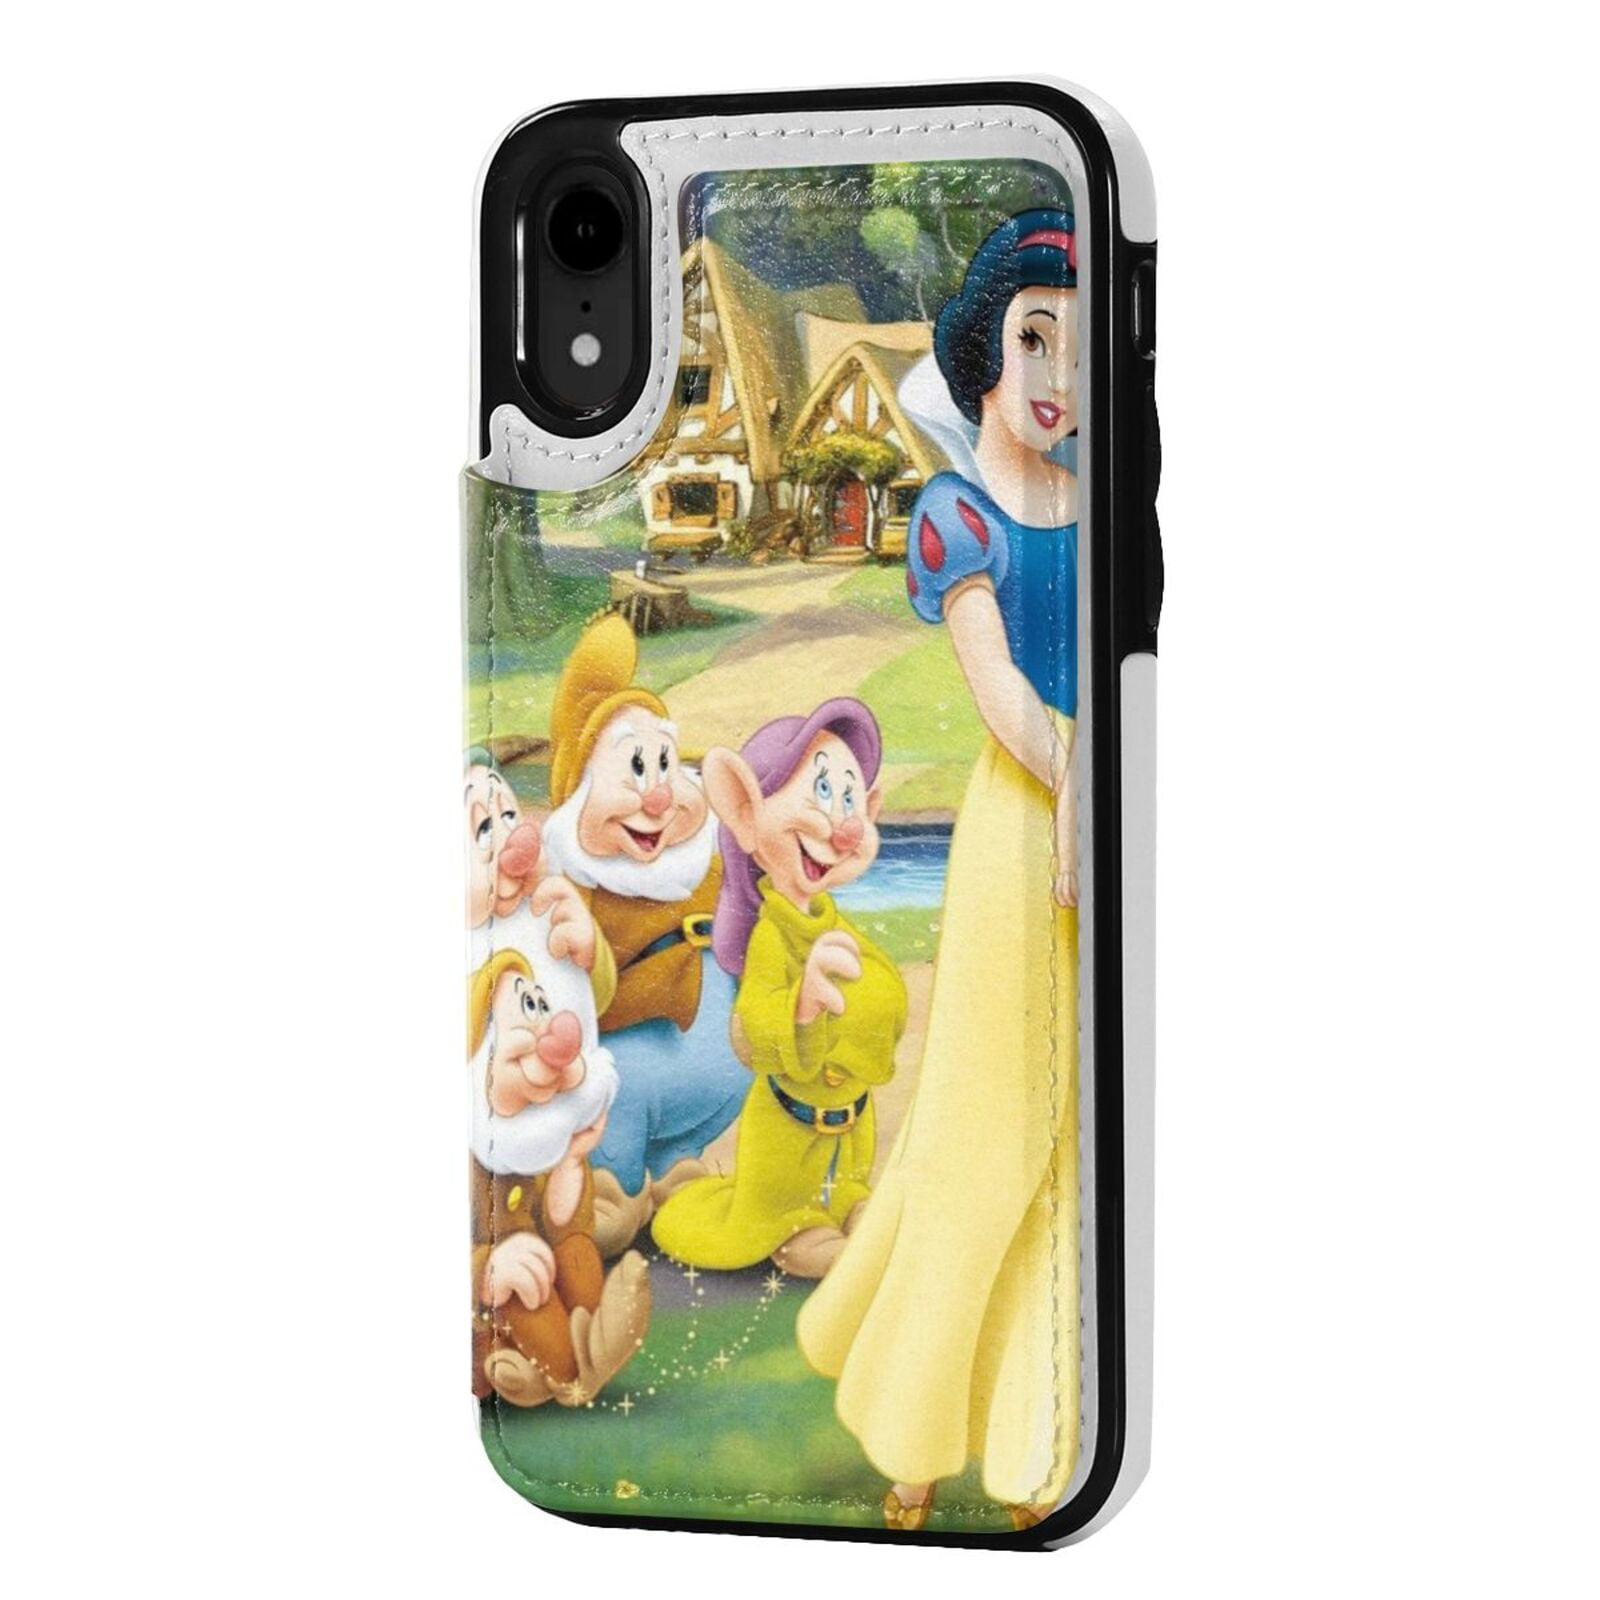 Snow White and the Seven Dwarfs Silicone Phone Case Cover For iPhone 6 7 8 X XR 11 12 13 Pro MAX